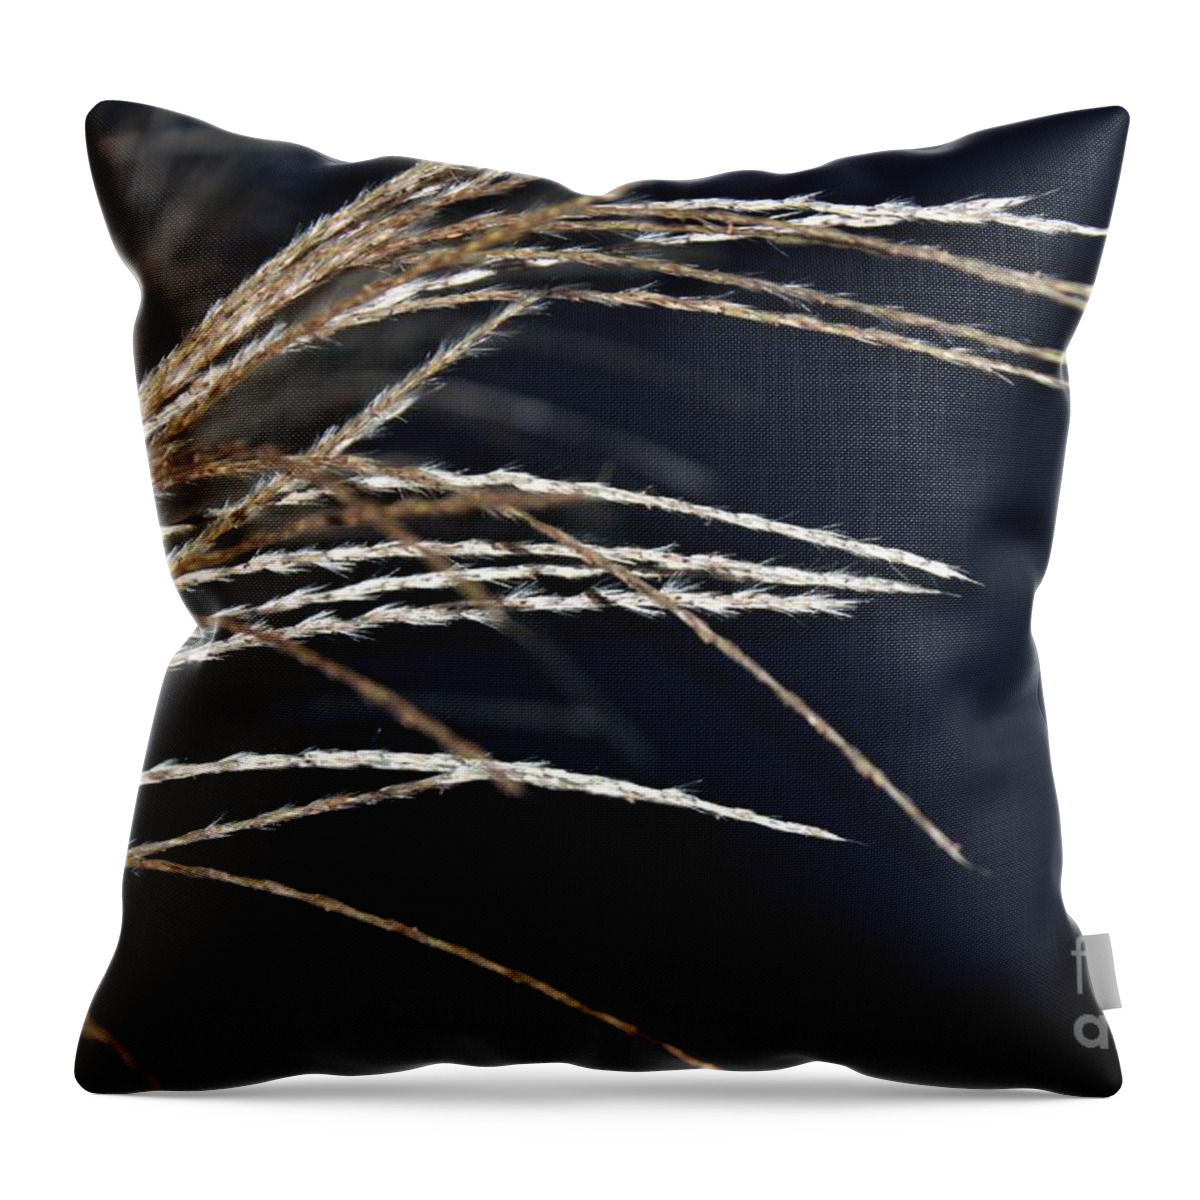 Grasses Throw Pillow featuring the photograph Texture by Margaret Hamilton